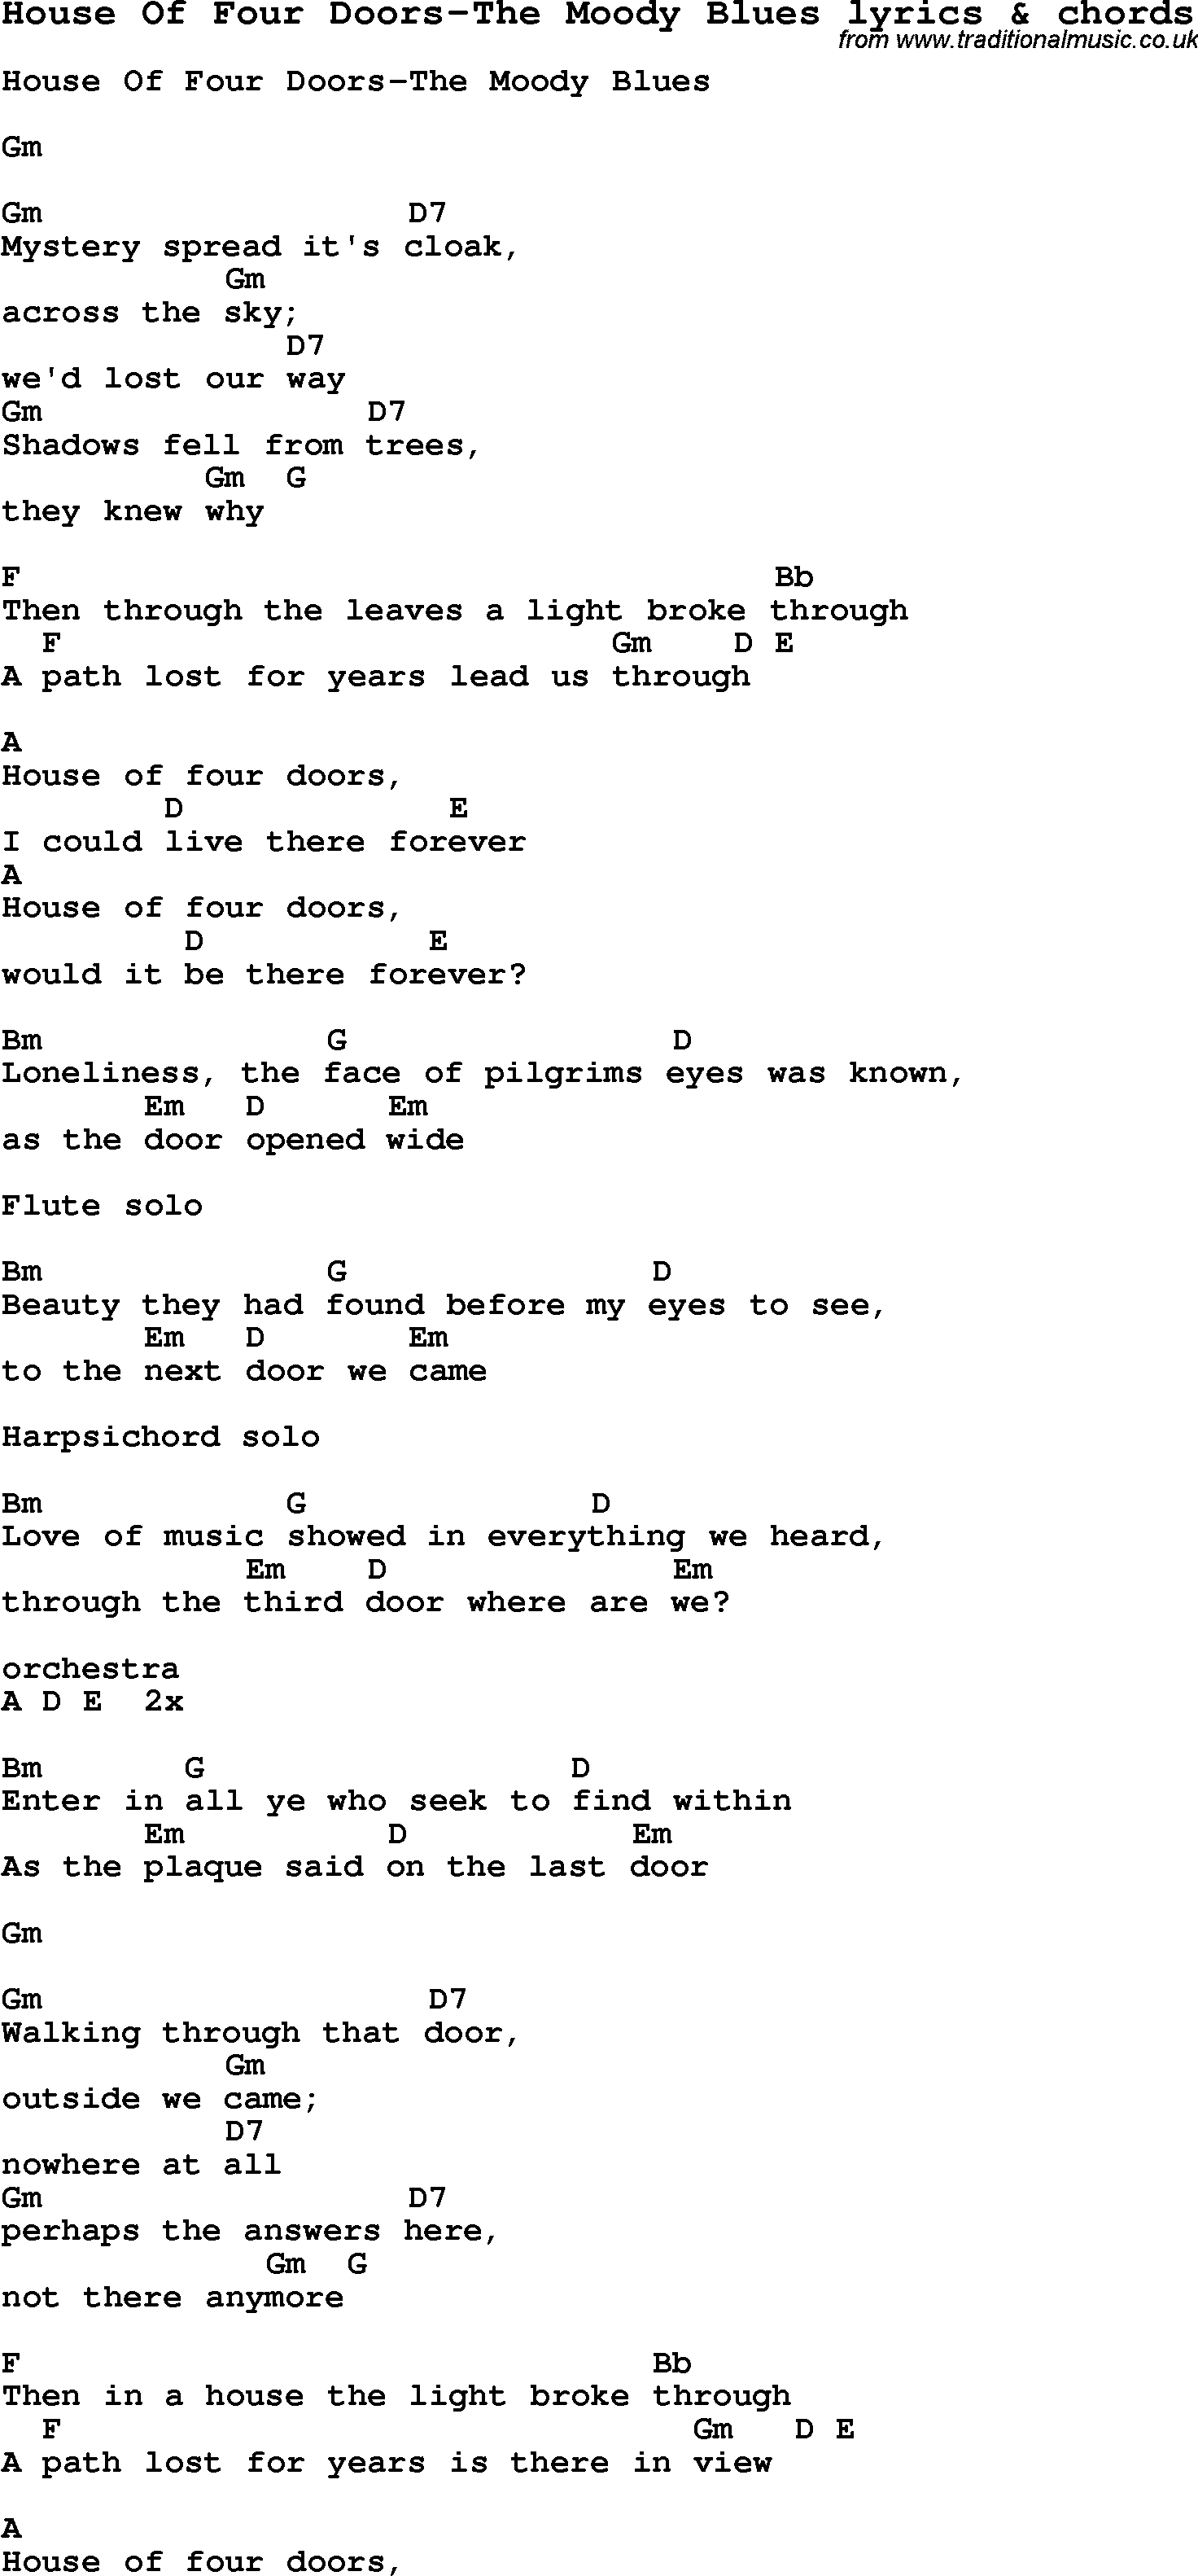 Love Song Lyrics for: House Of Four Doors-The Moody Blues with chords for Ukulele, Guitar Banjo etc.